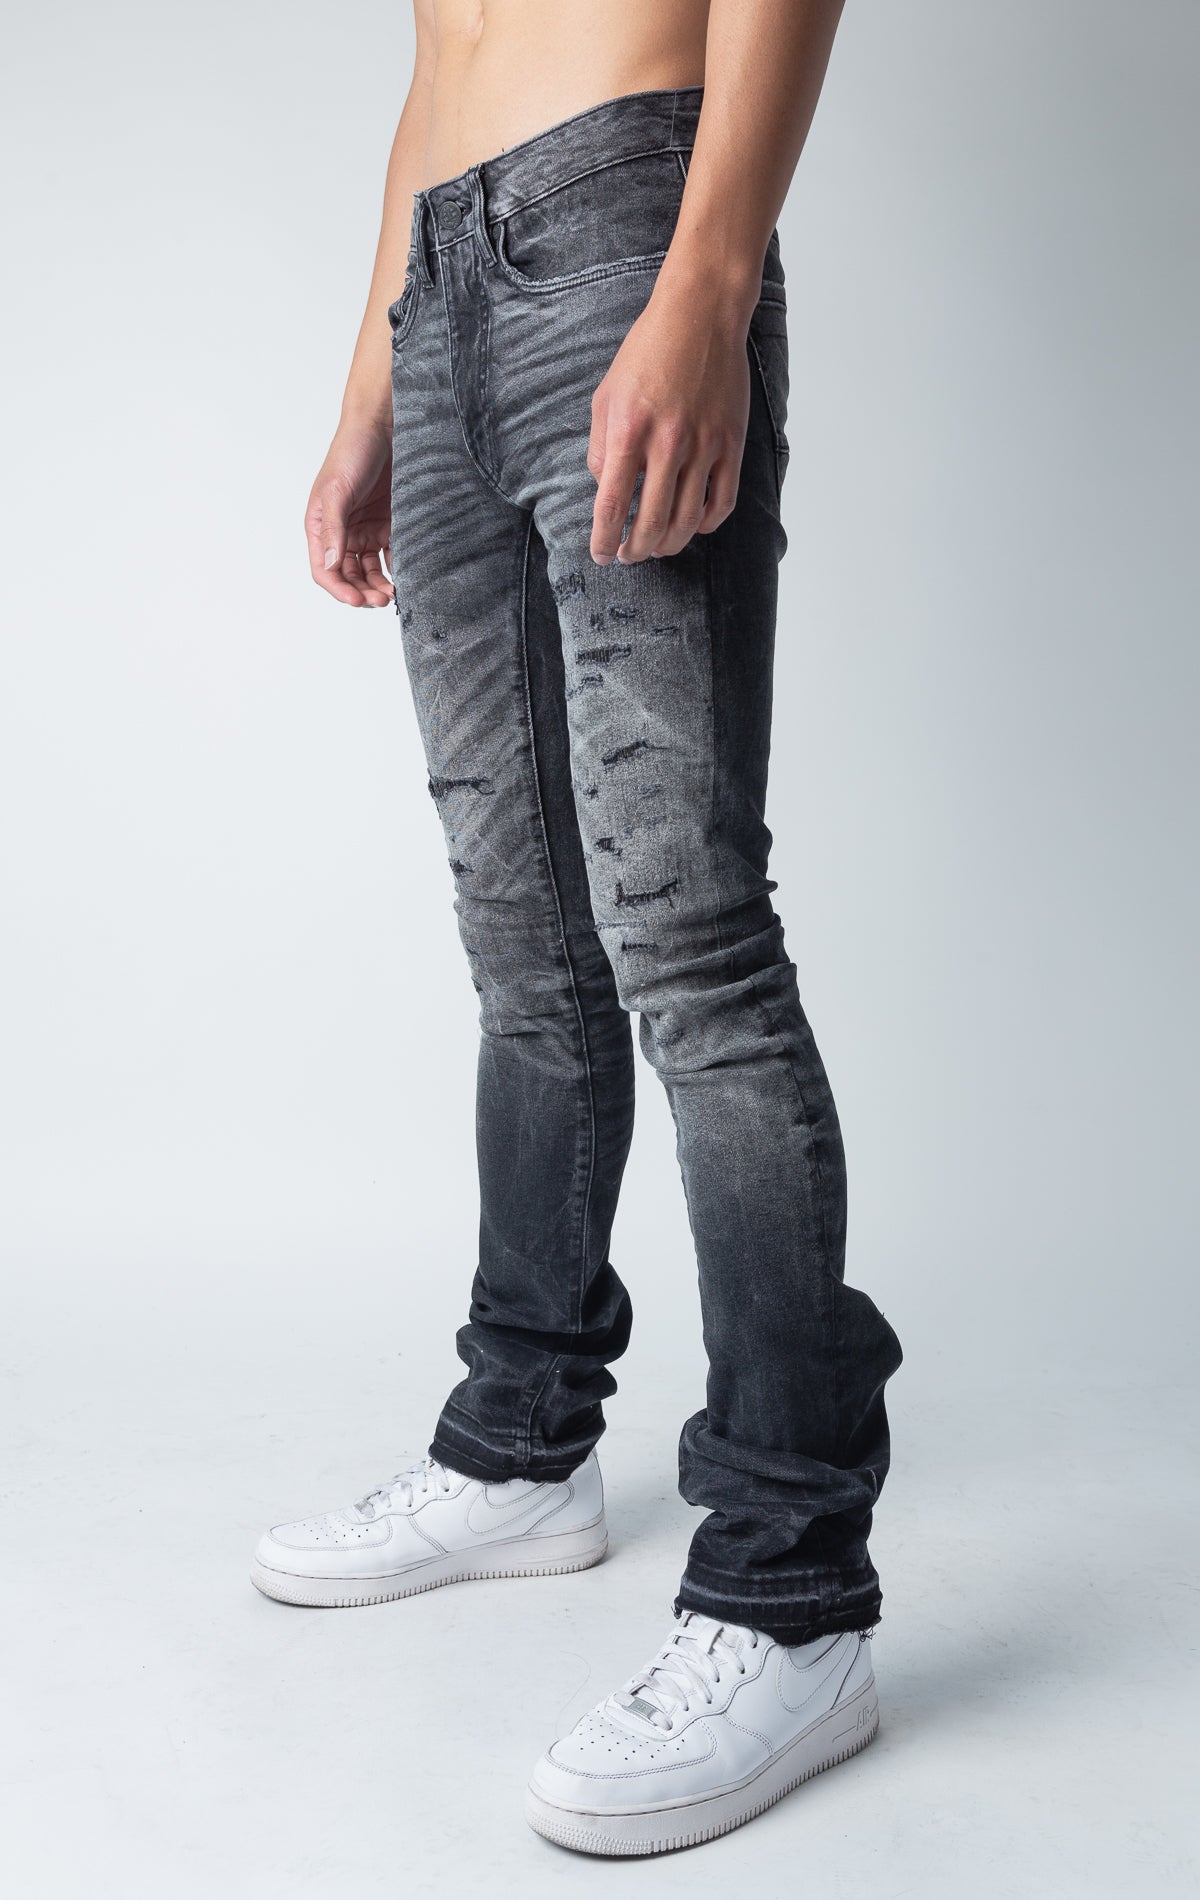 black shadow jeans with 3D wrinkles, rip and repair design